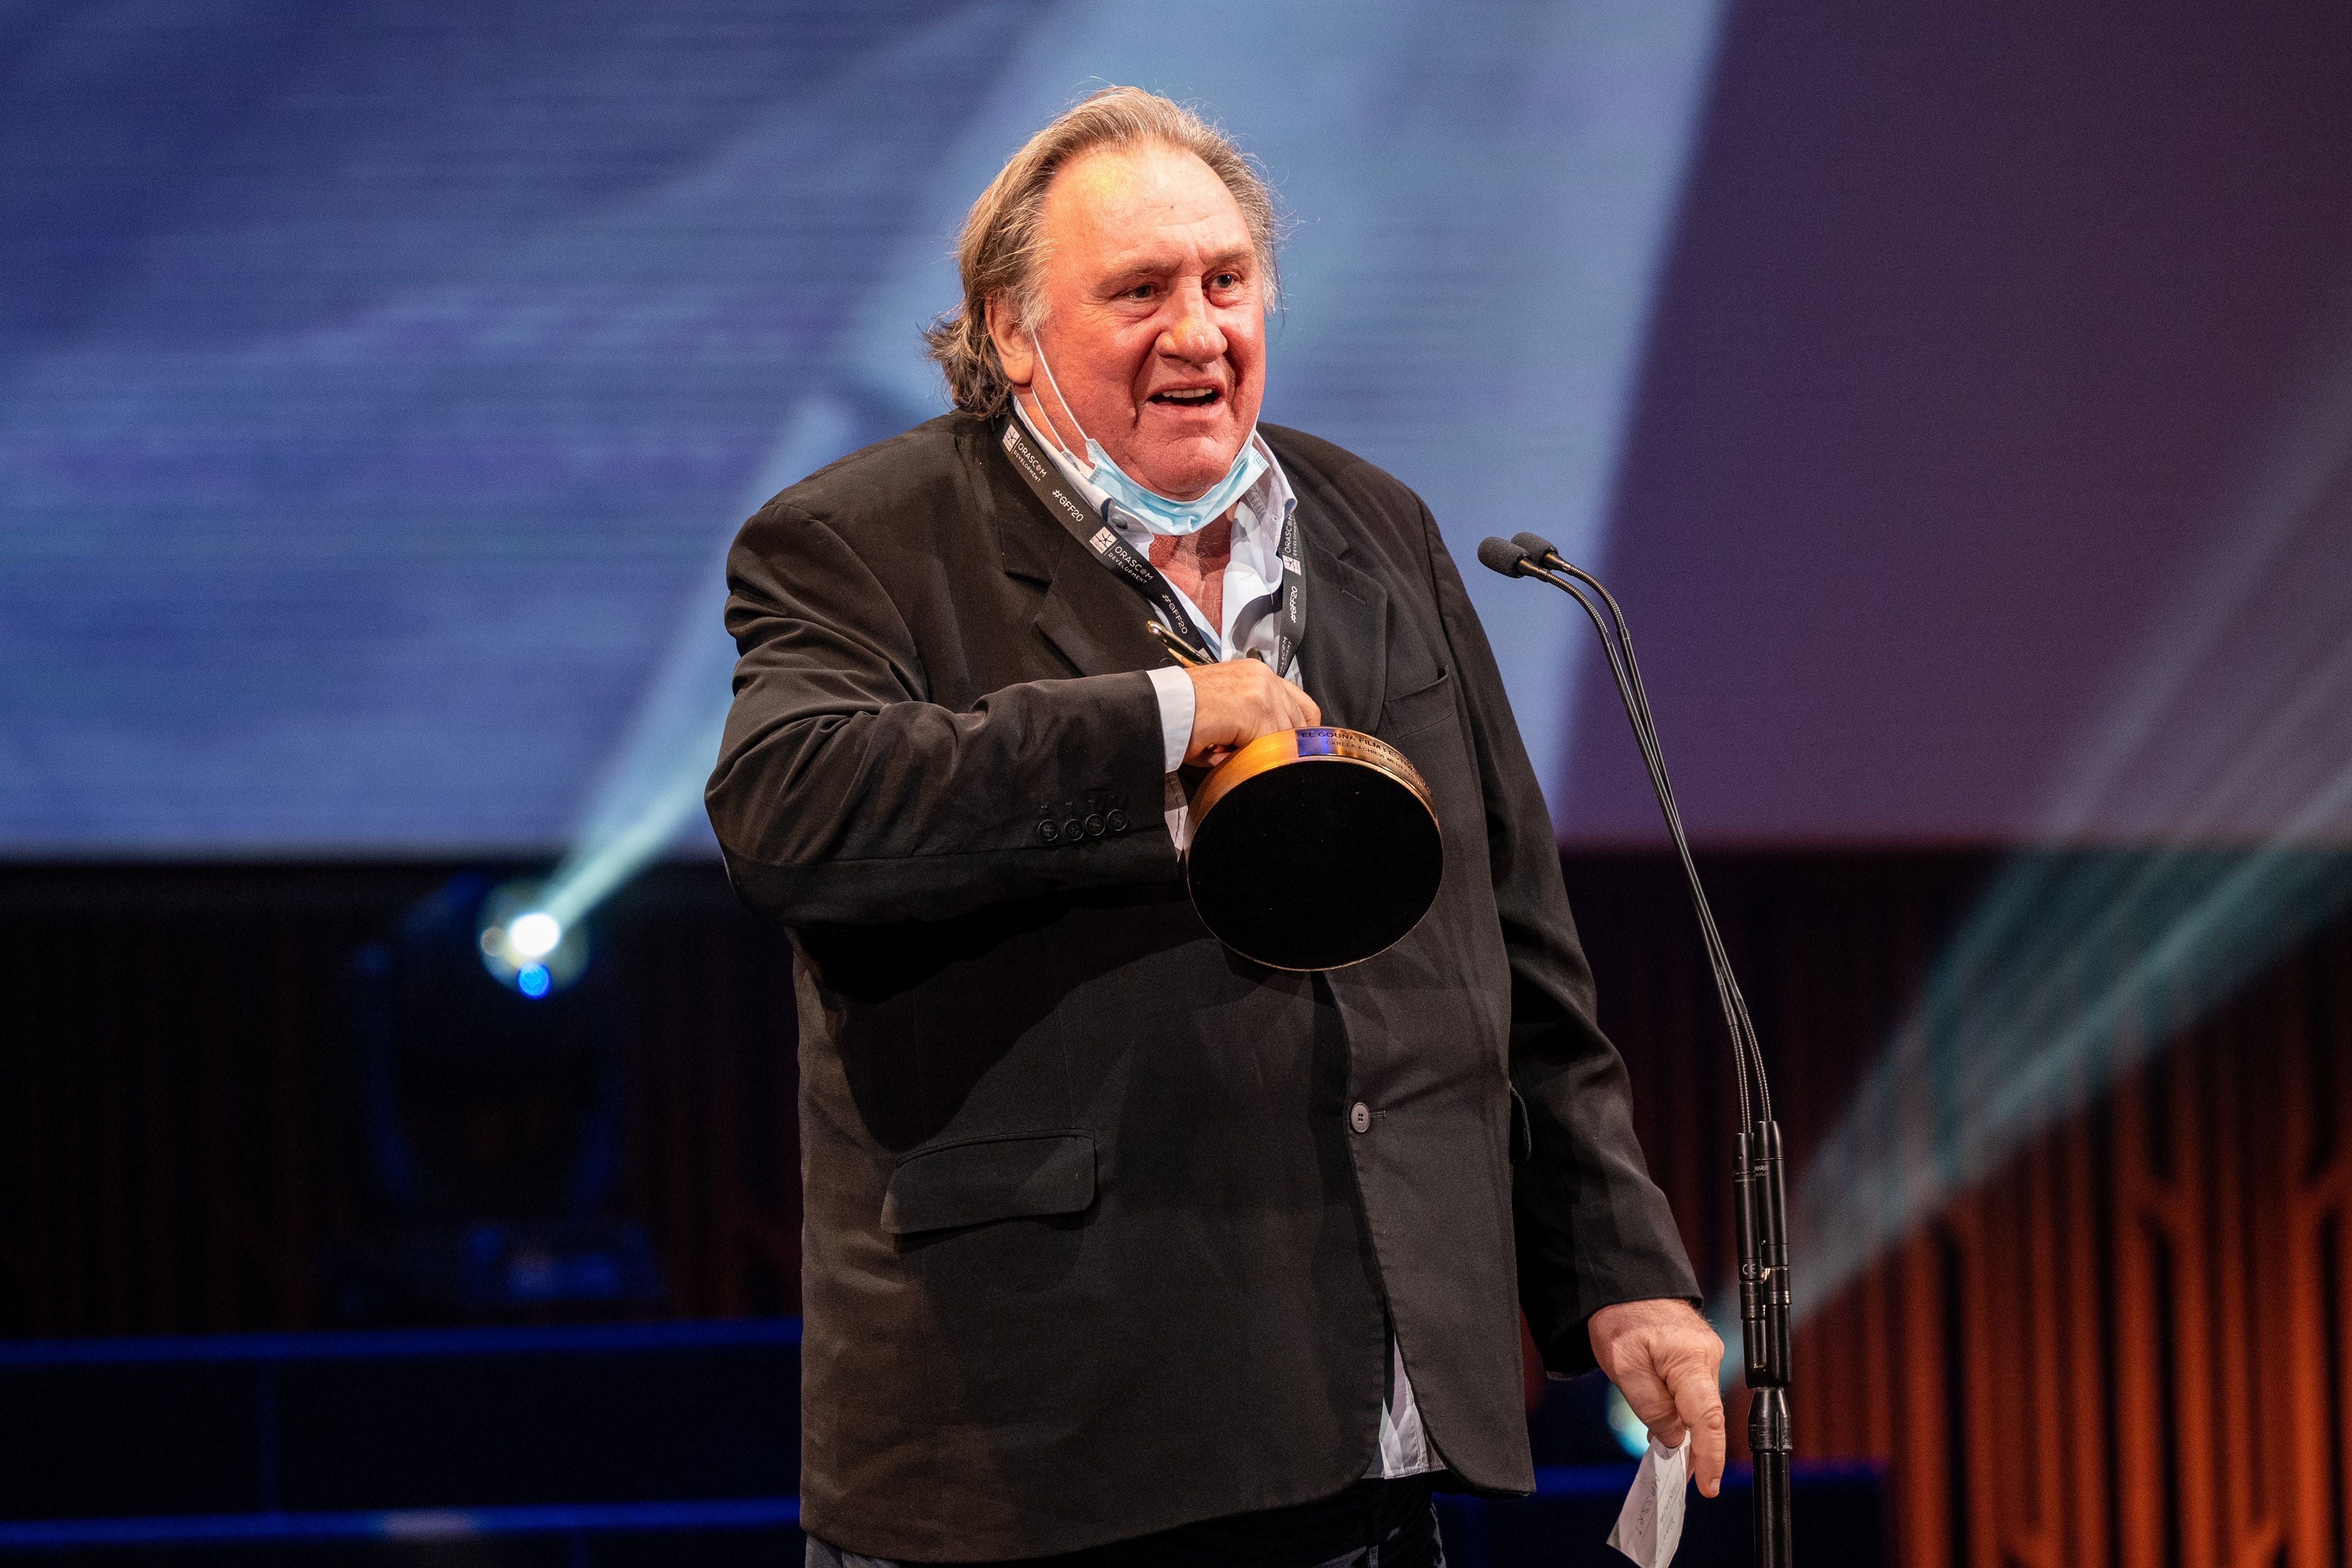 Depardieu picking up a career achievement award at the El Gouna Film Festival in the Egyptian Red Sea resort of el Gouna on 23 October, 2020